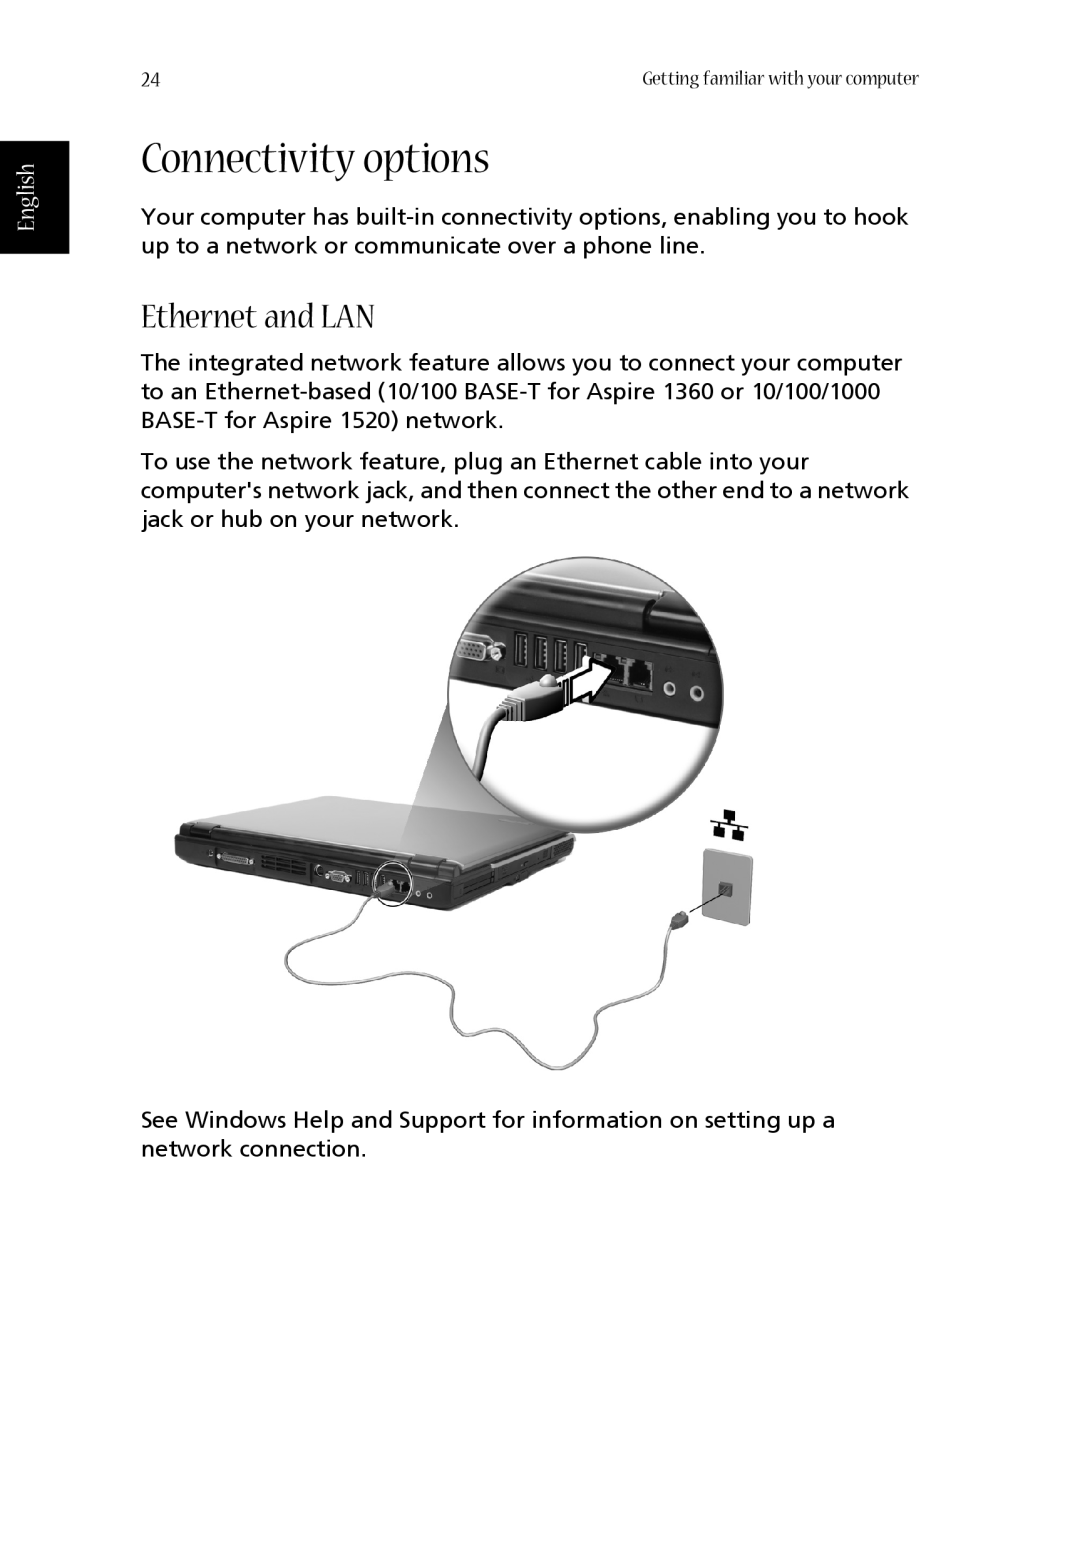 Acer 1360 manual Connectivity options, Ethernet and LAN, English 